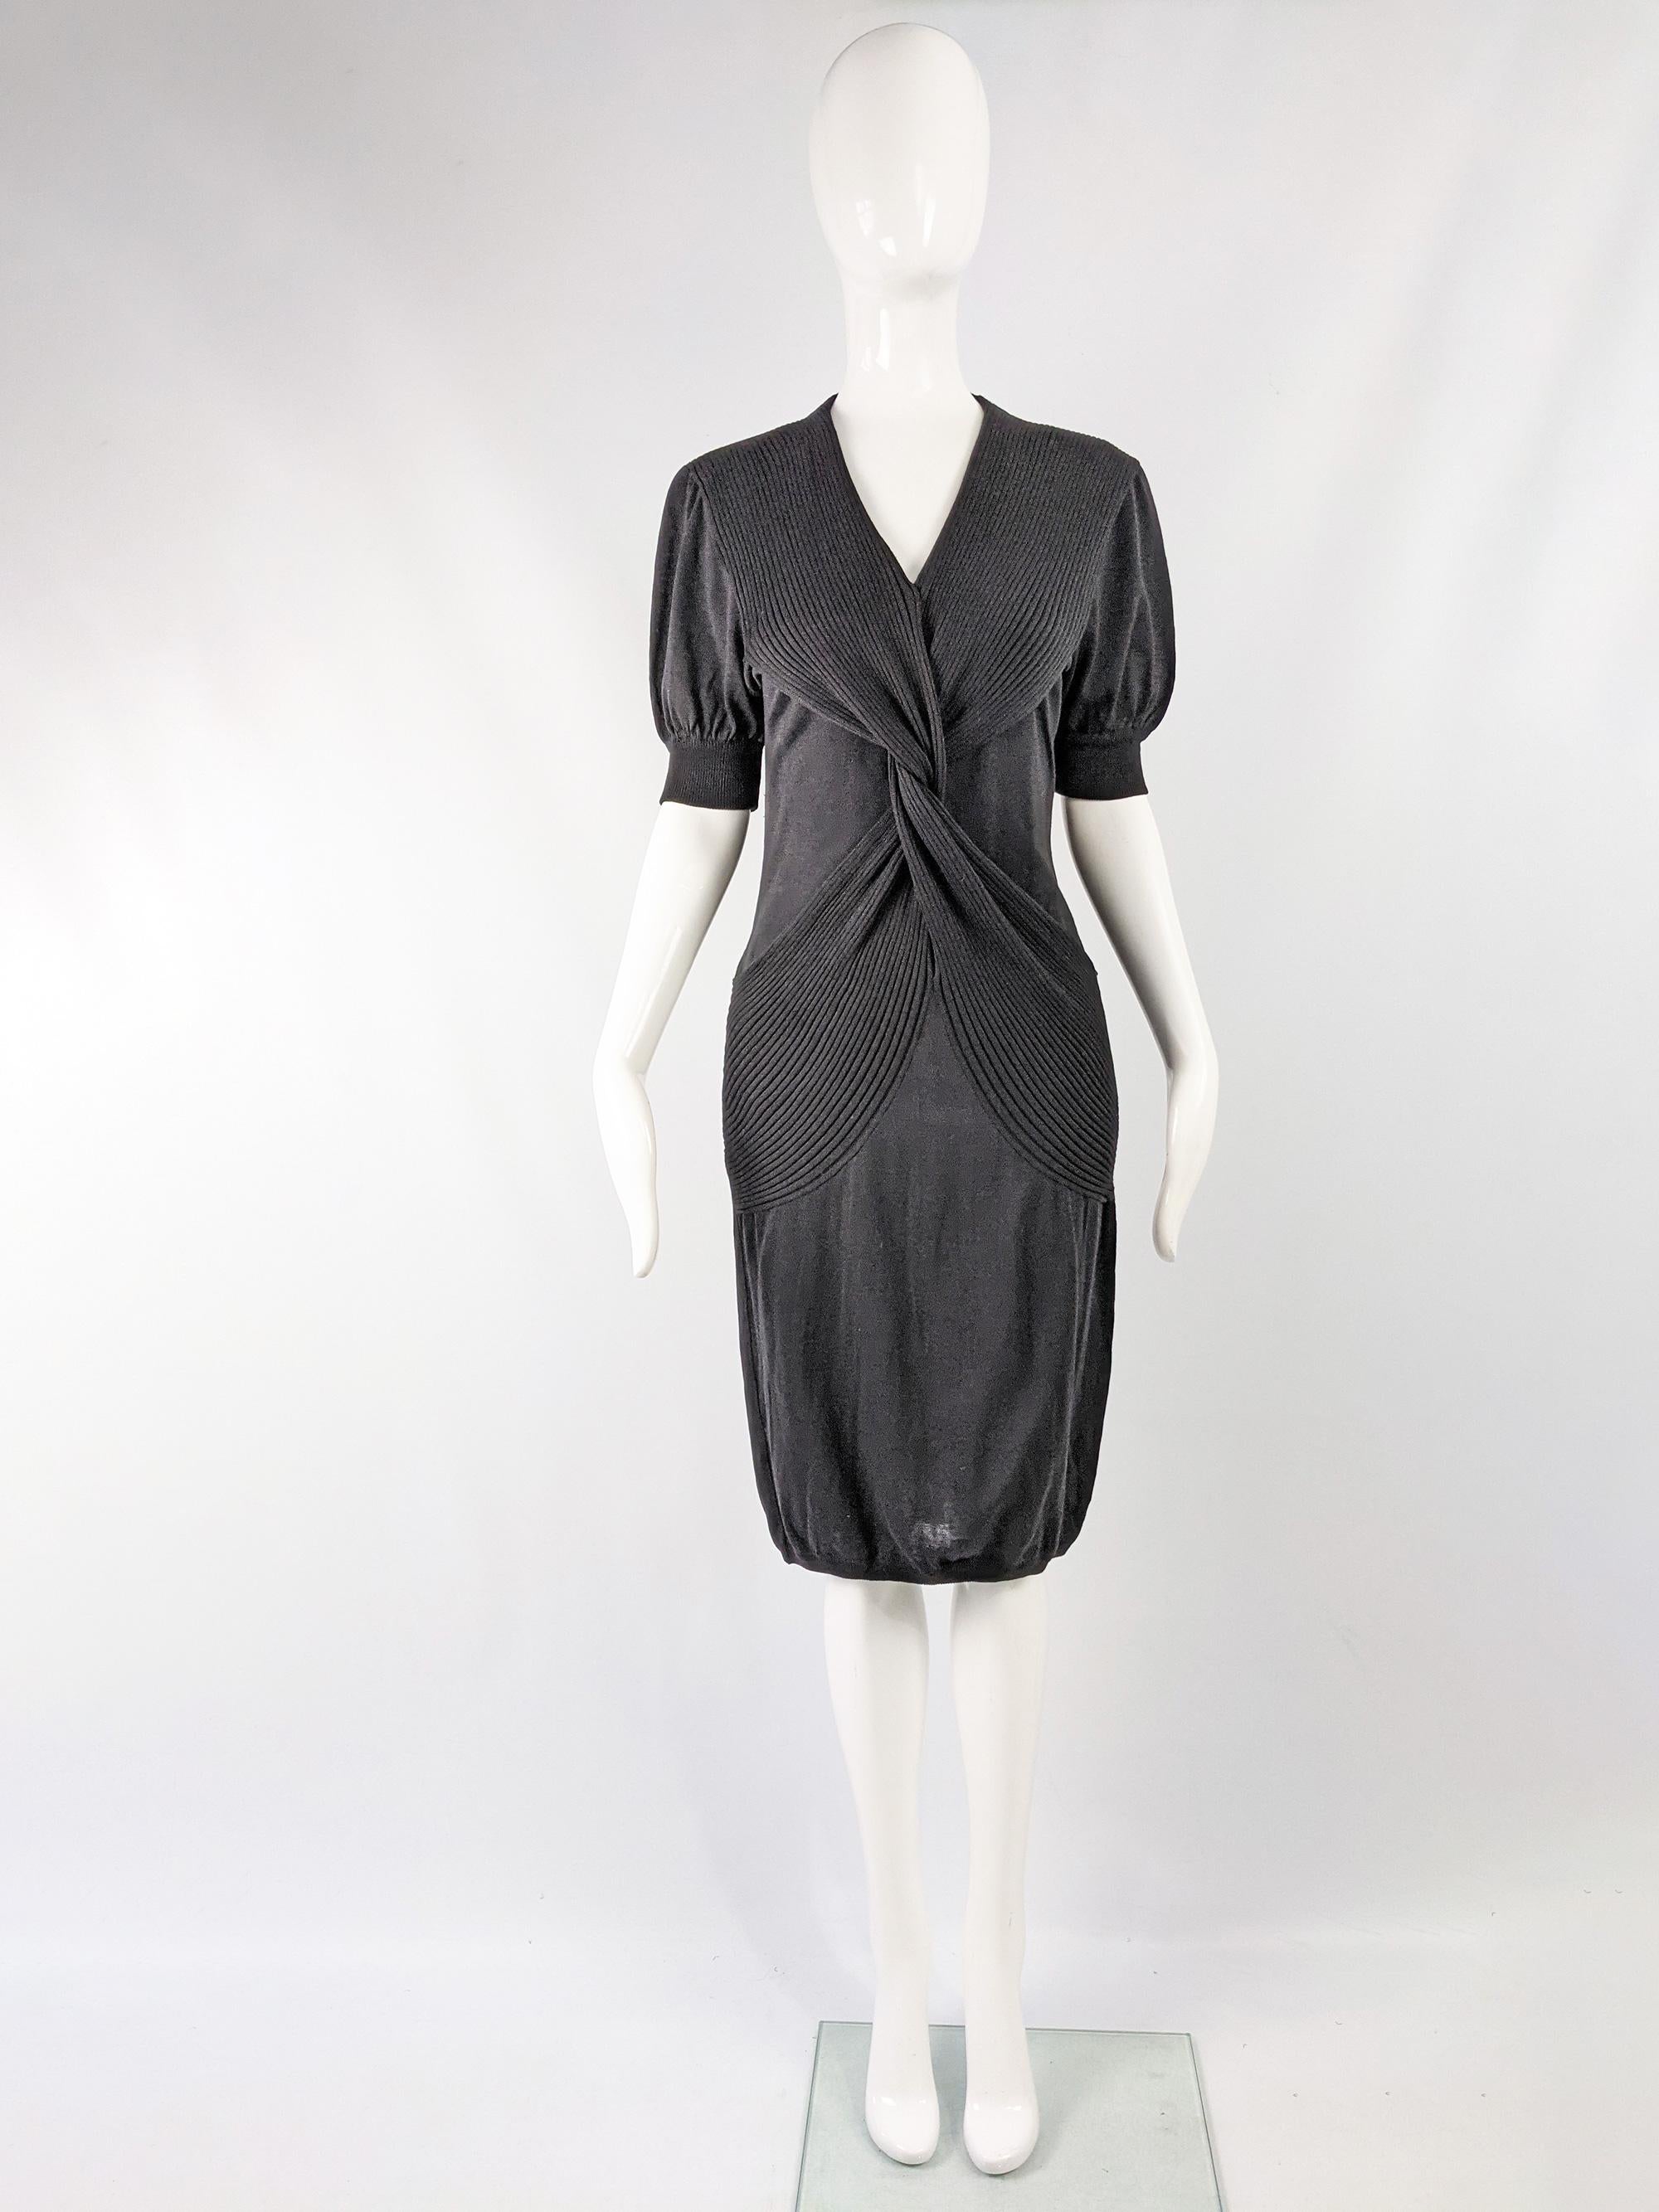 A beautiful vintage dress from the 80s by luxury Italian fashion designer, Mila Schon. Made in Italy, in a black lightweight cotton knit fabric with a twisted front and short puffed sleeves. Perfect for day or evening. 

Size: Marked S
Bust -